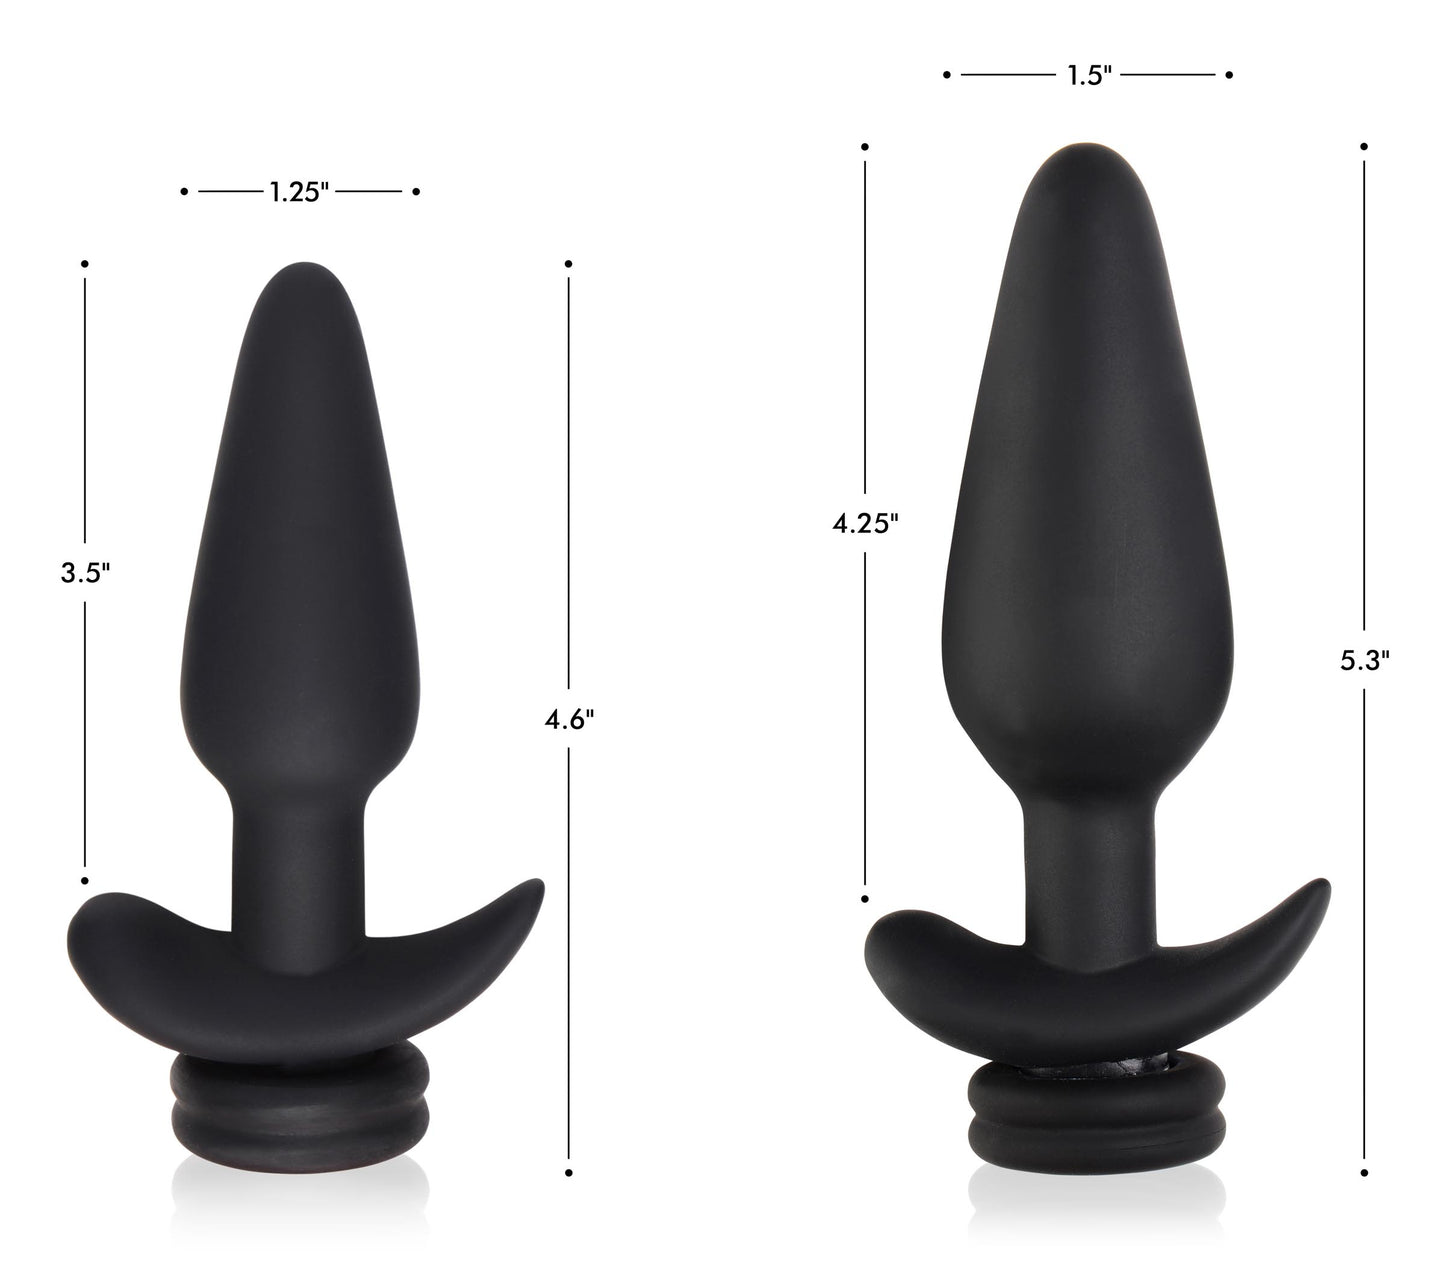 Large Vibrating Anal Plug with Interchangeable Fox Tail - Black - UABDSM